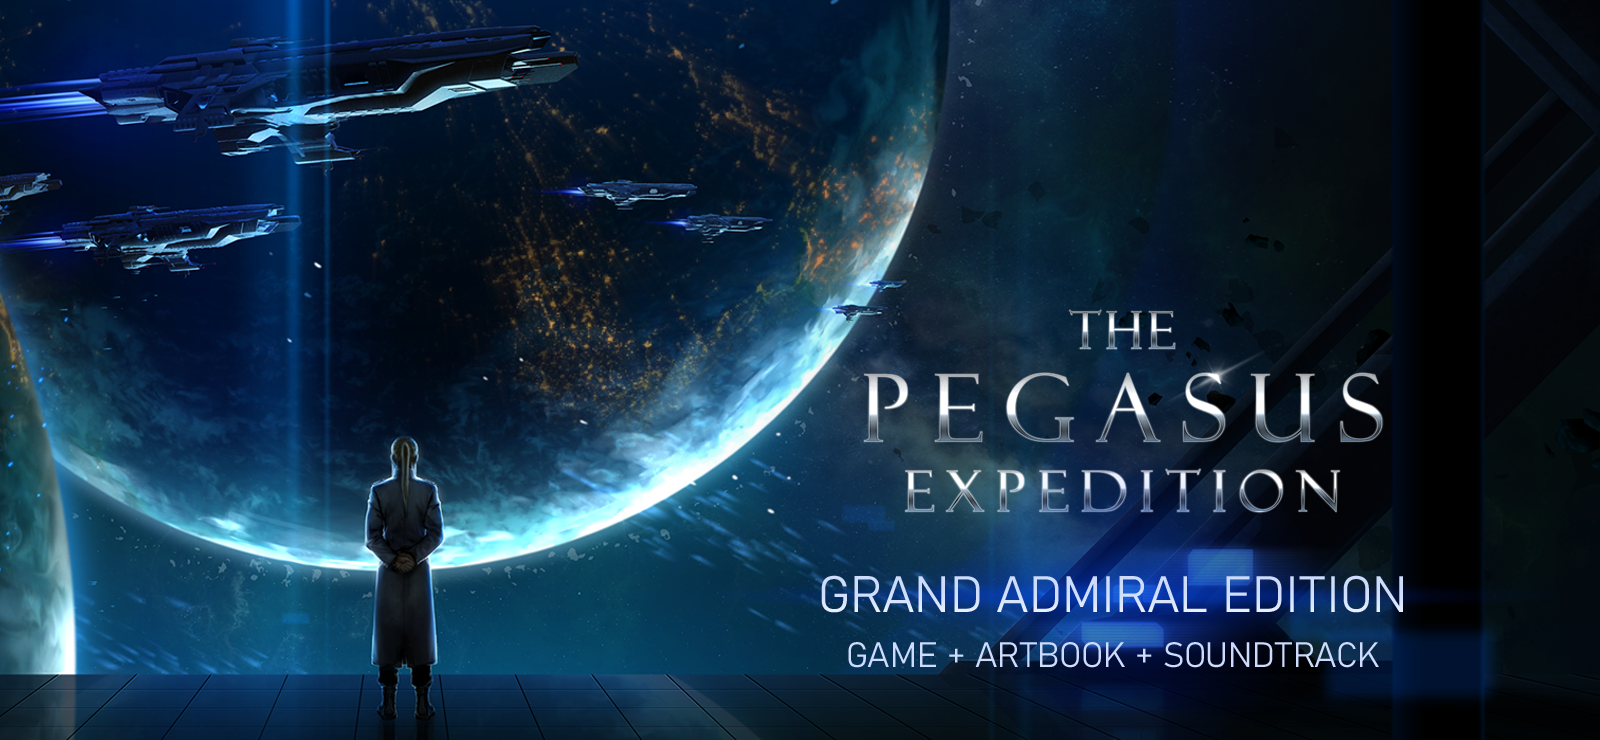 The Pegasus Expedition – Grand Admiral Edition